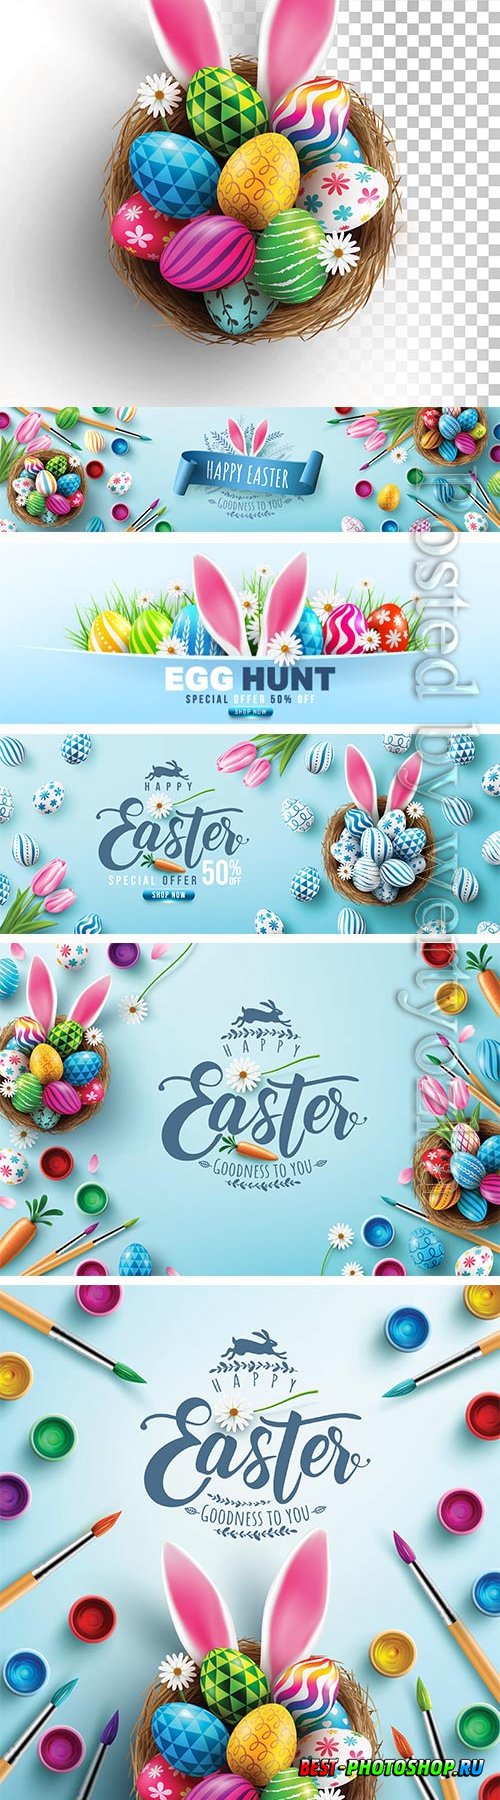 Easter poster and banner vector template with Easter eggs